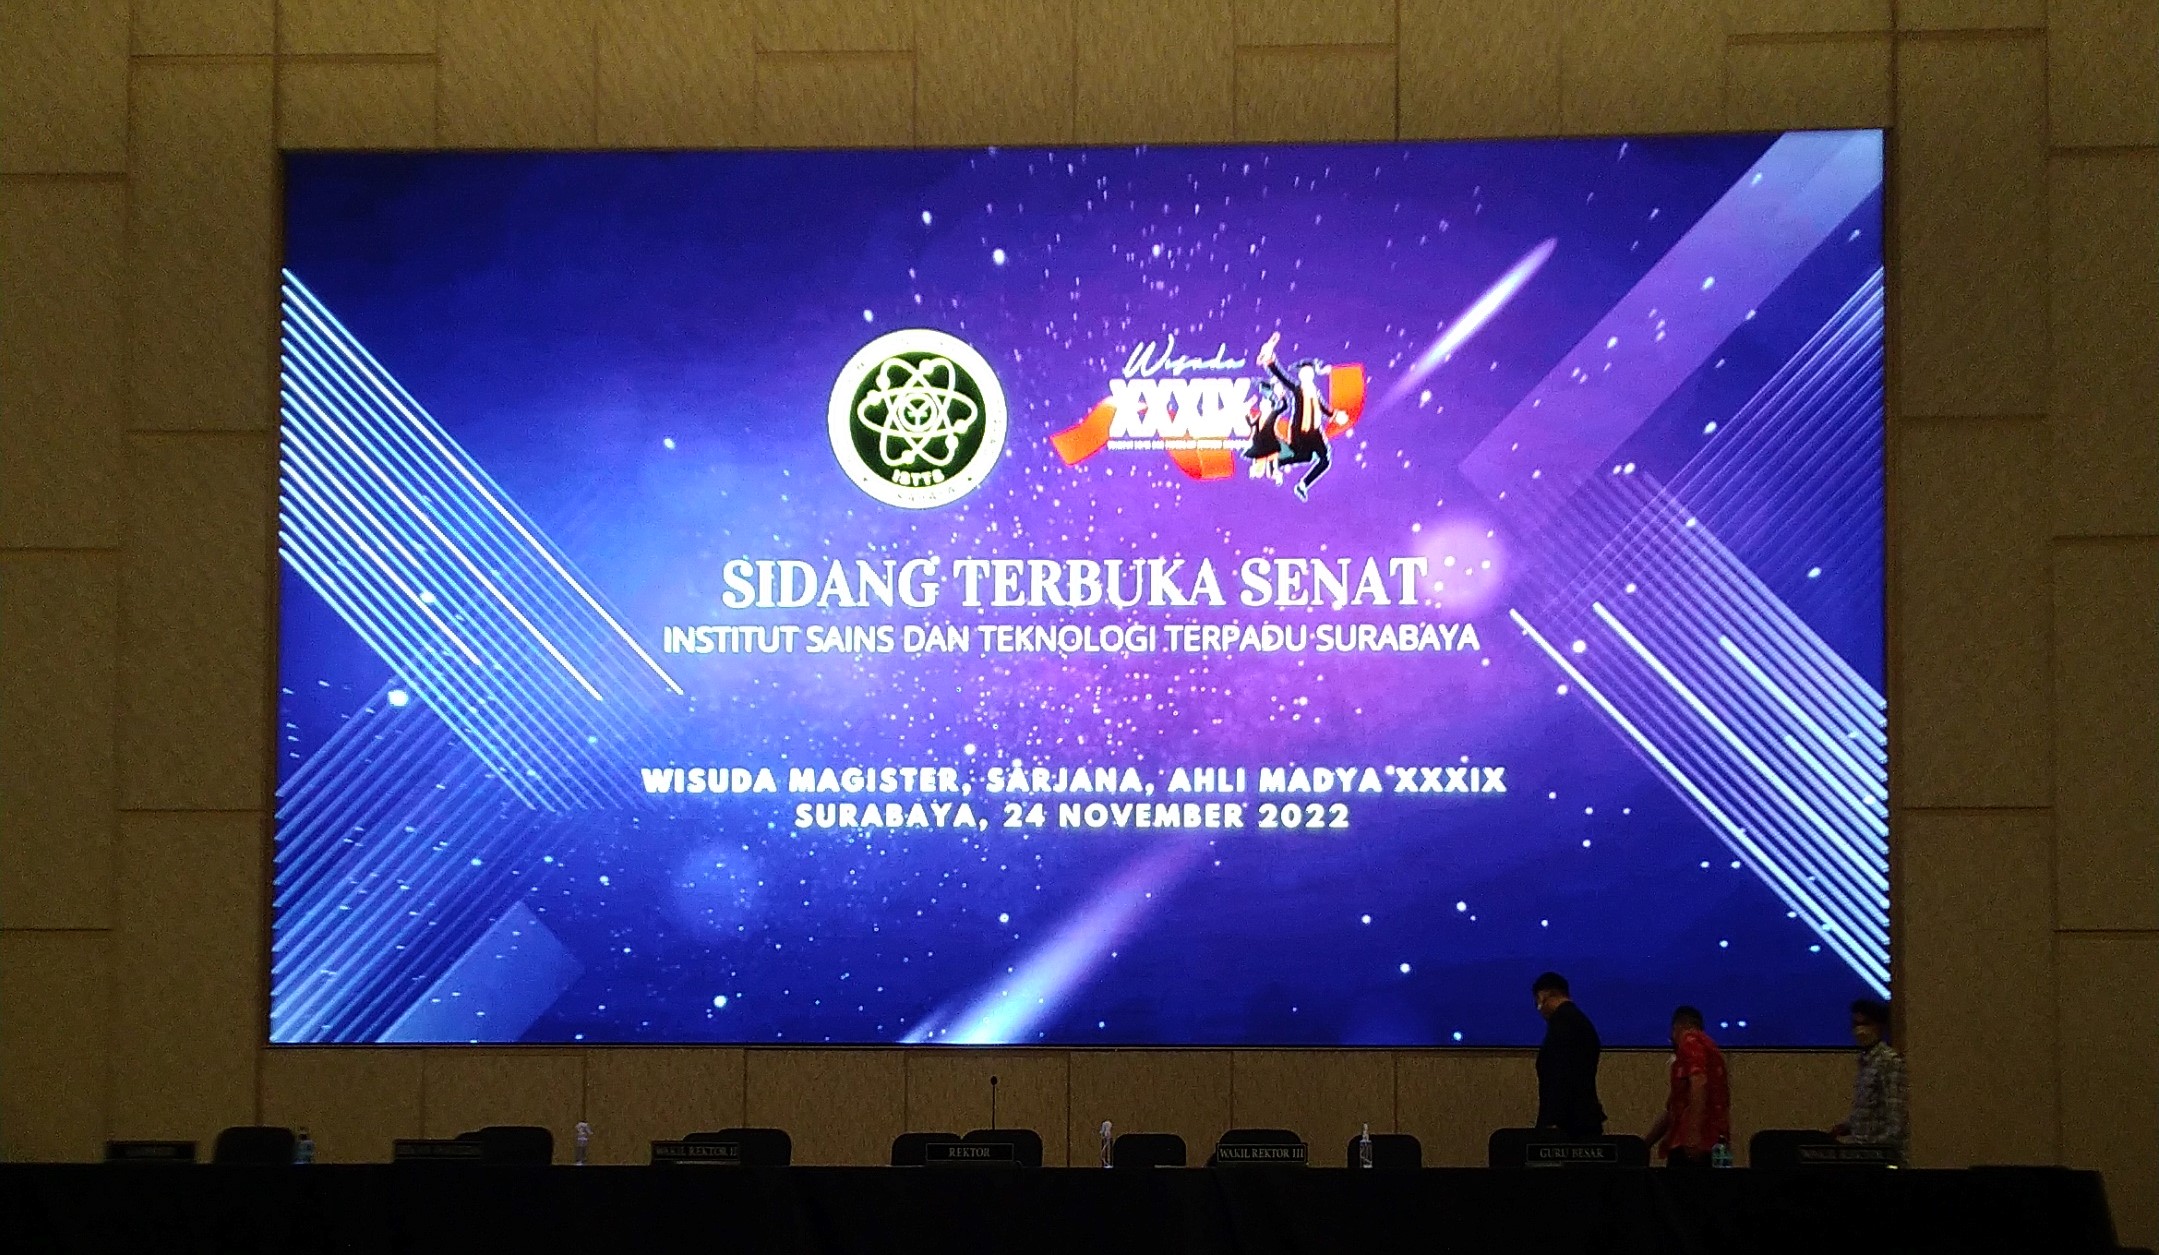 XXXIX Graduation of Surabaya Integrated Science and Technology Institute